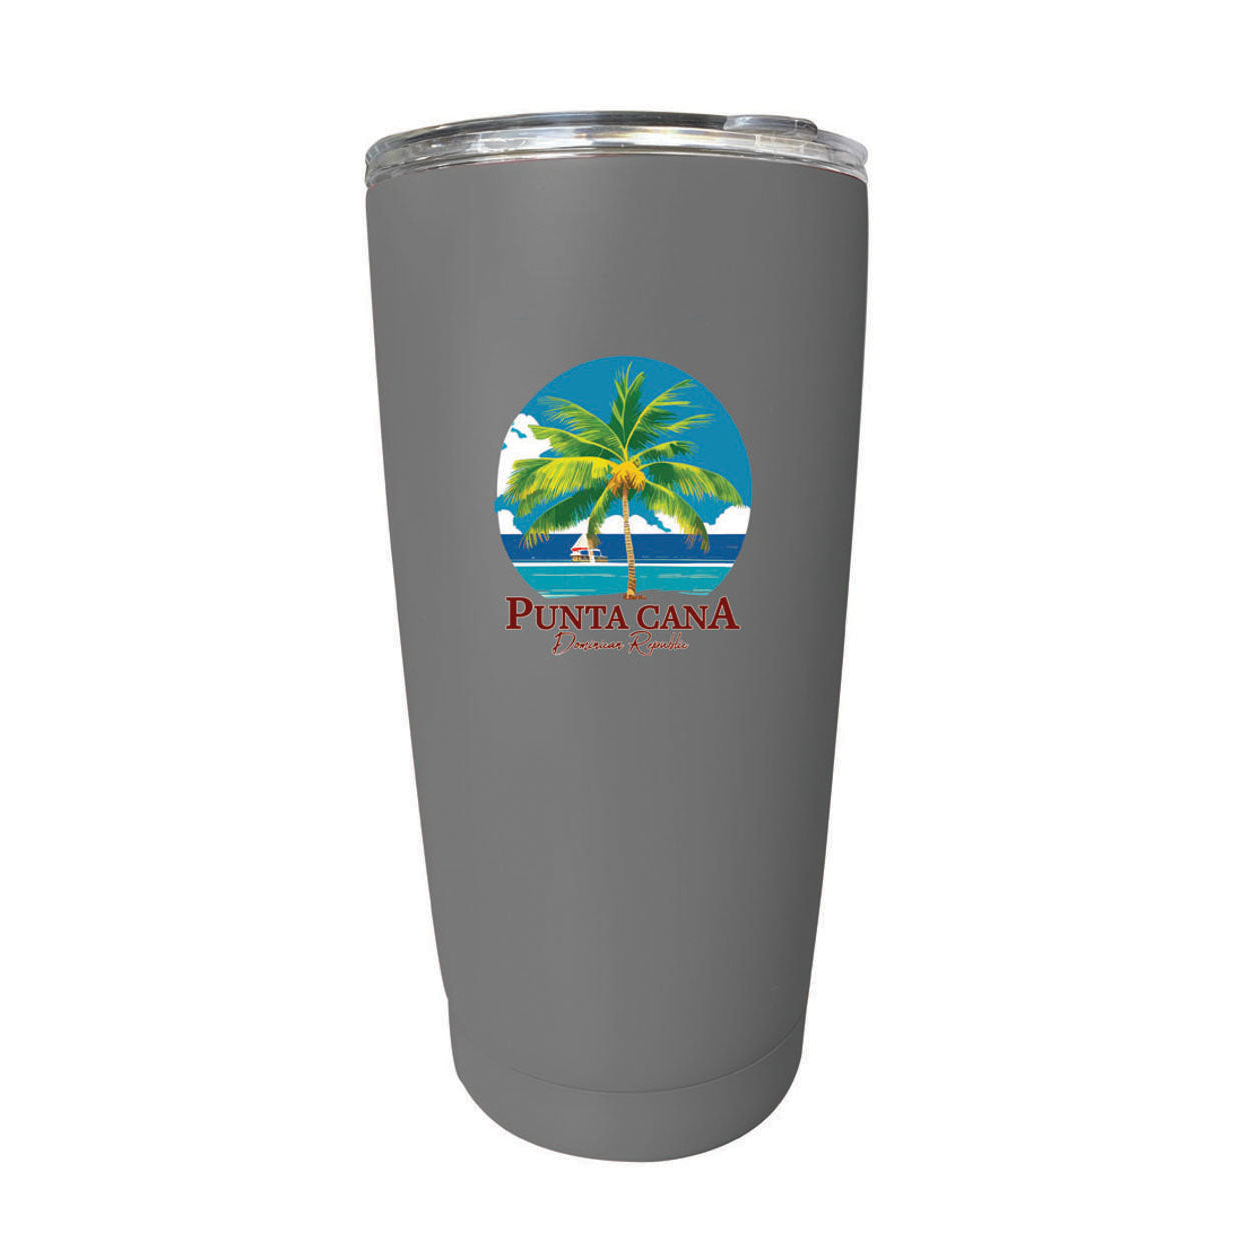 Punta Cana Dominican Republic Souvenir 16 Oz Stainless Steel Insulated Tumbler - White, PARROT